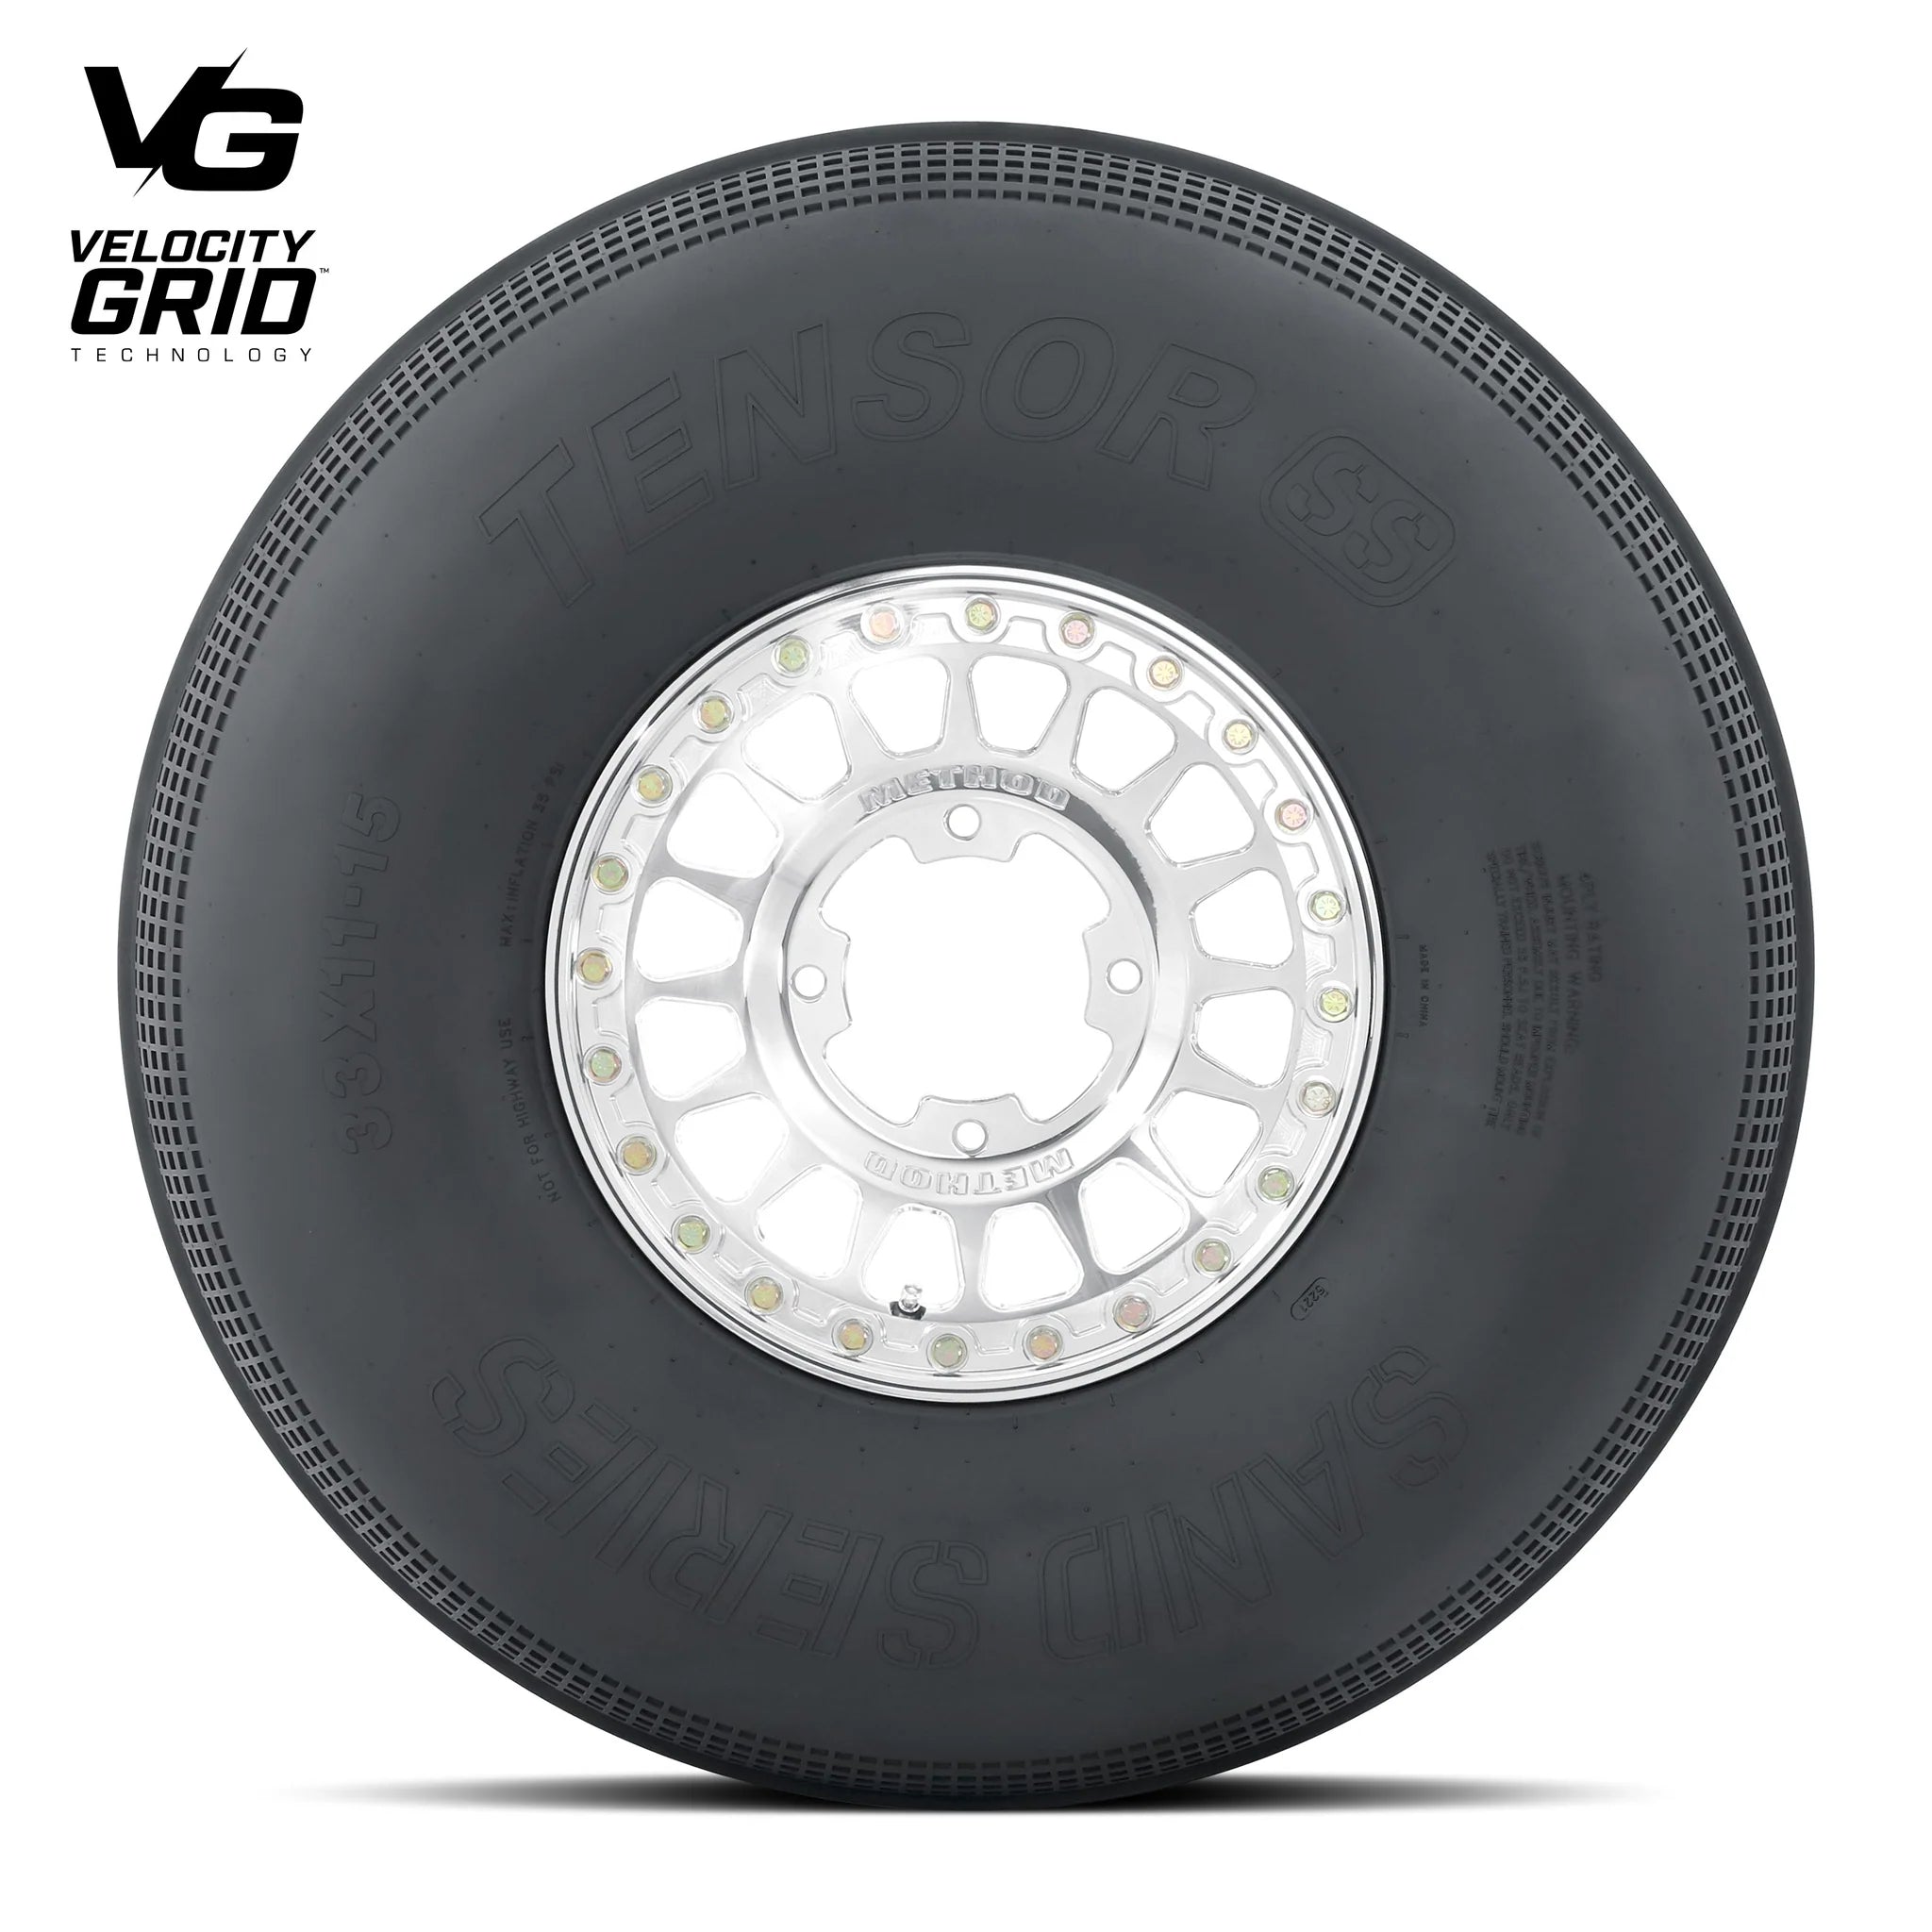 SS “SAND SERIES" FRONT TIRE - 33X11-15